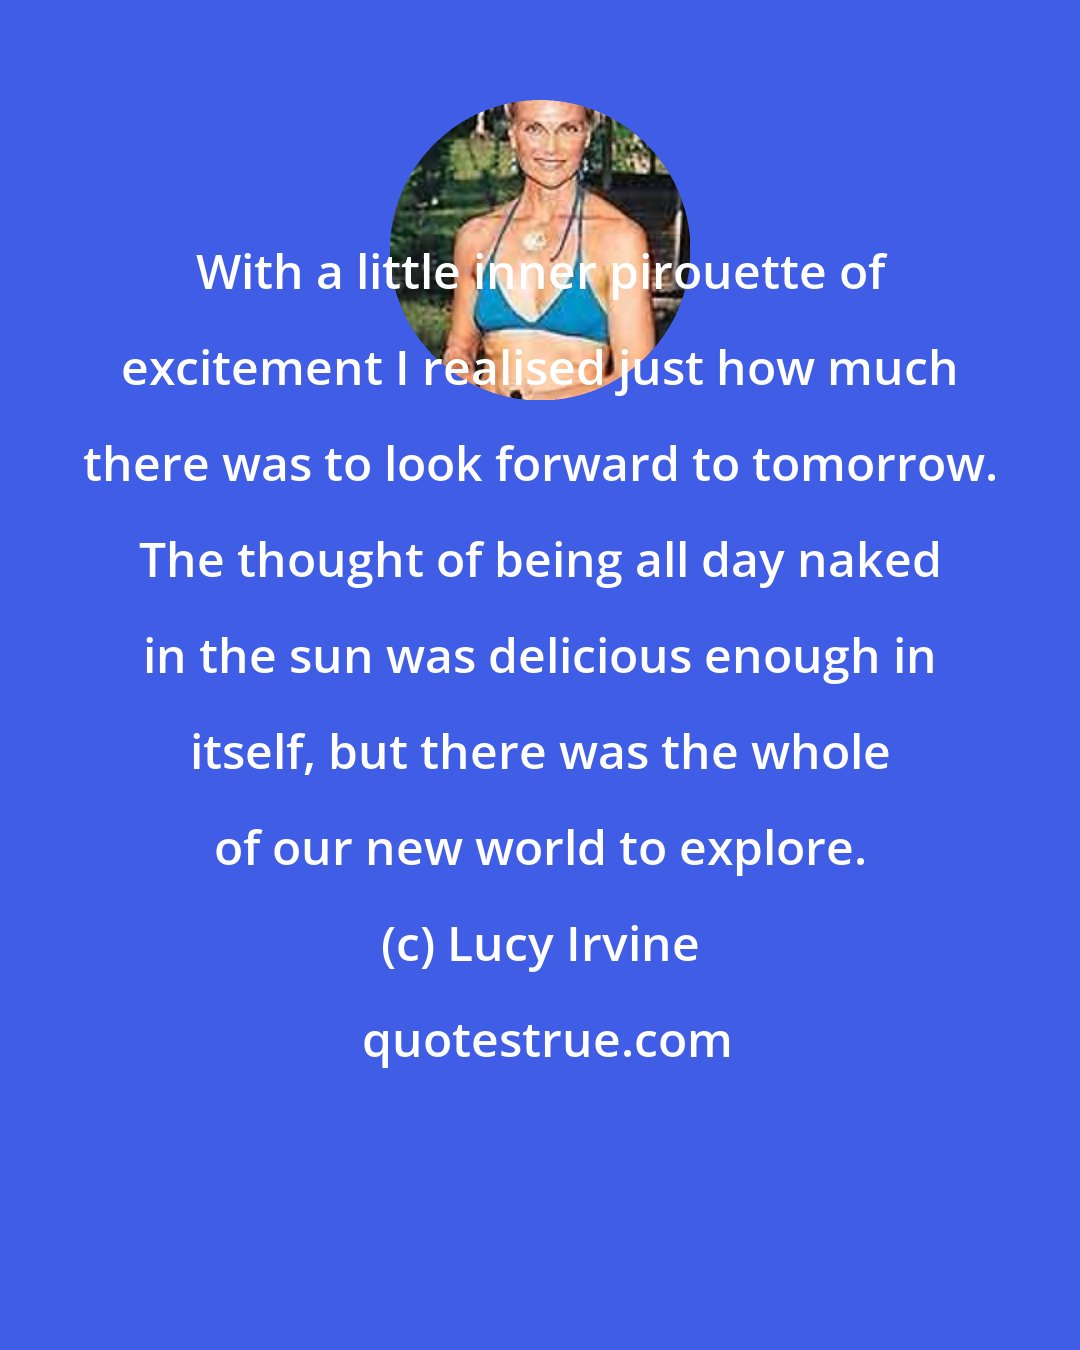 Lucy Irvine: With a little inner pirouette of excitement I realised just how much there was to look forward to tomorrow. The thought of being all day naked in the sun was delicious enough in itself, but there was the whole of our new world to explore.